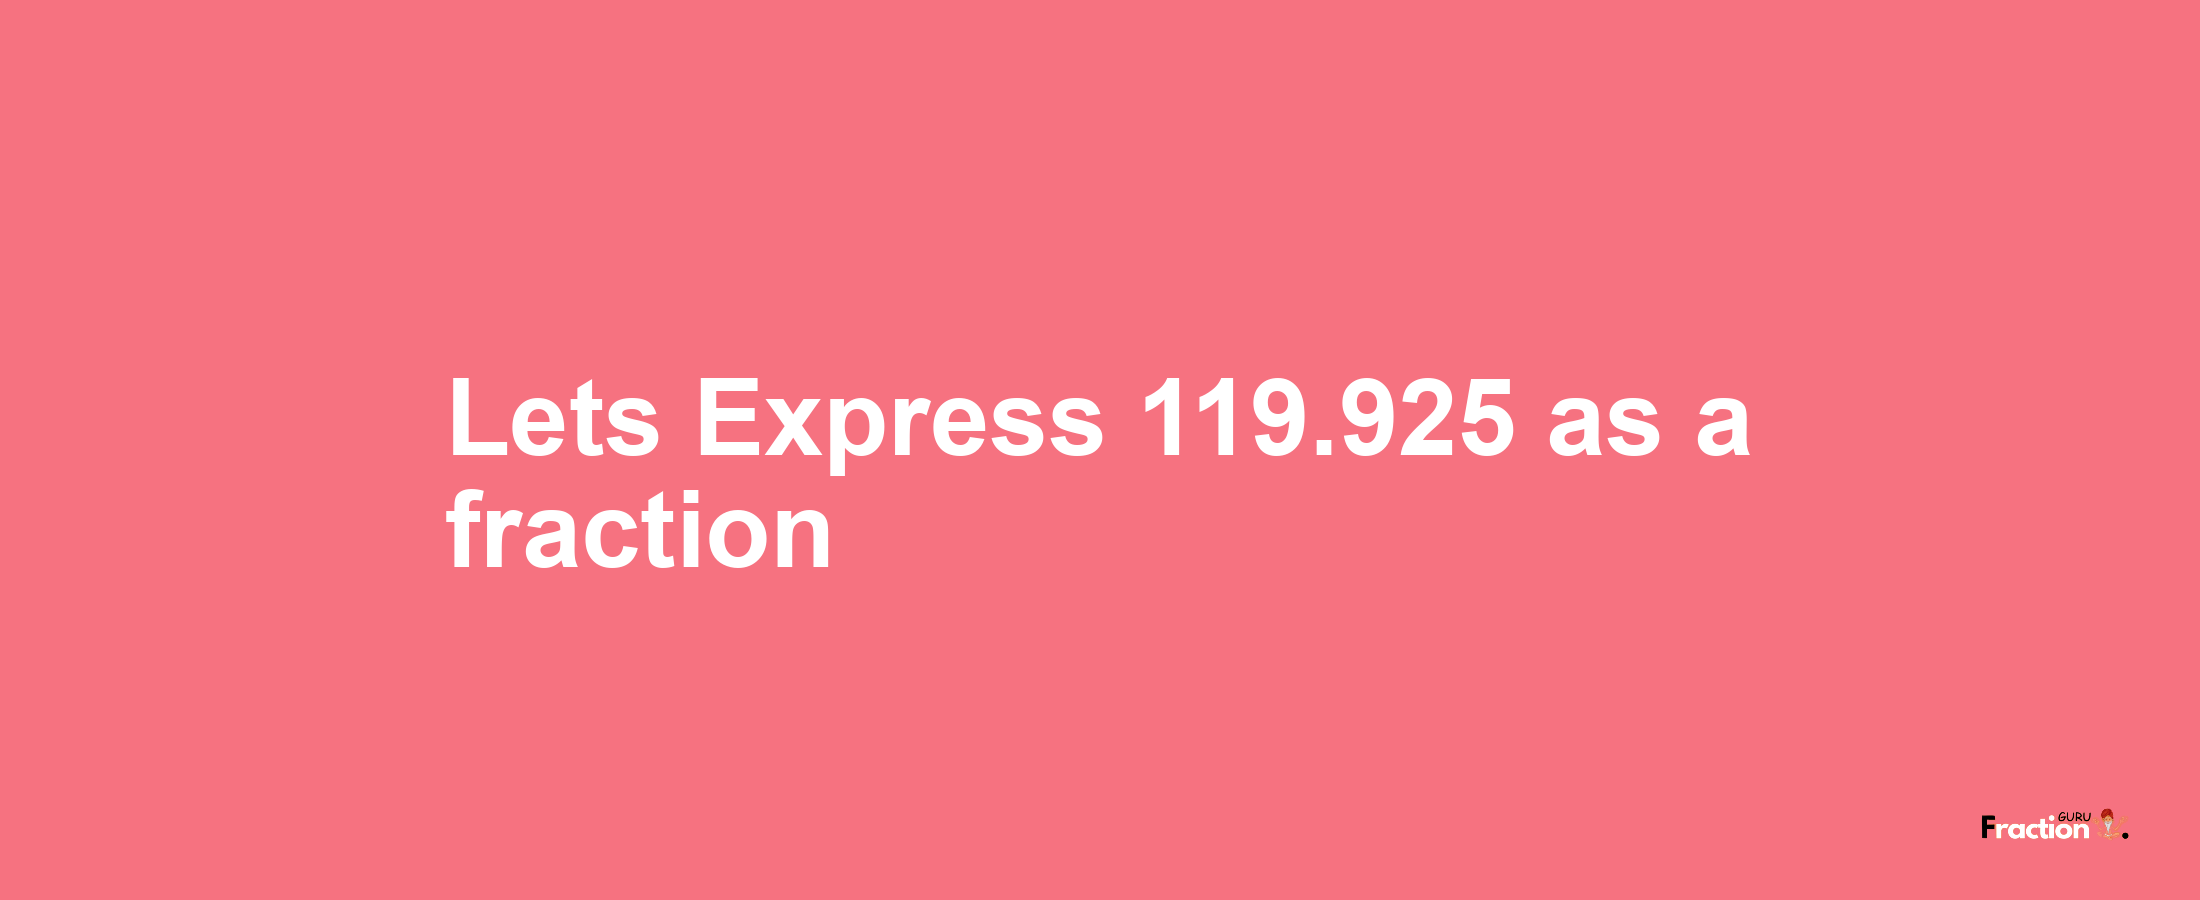 Lets Express 119.925 as afraction